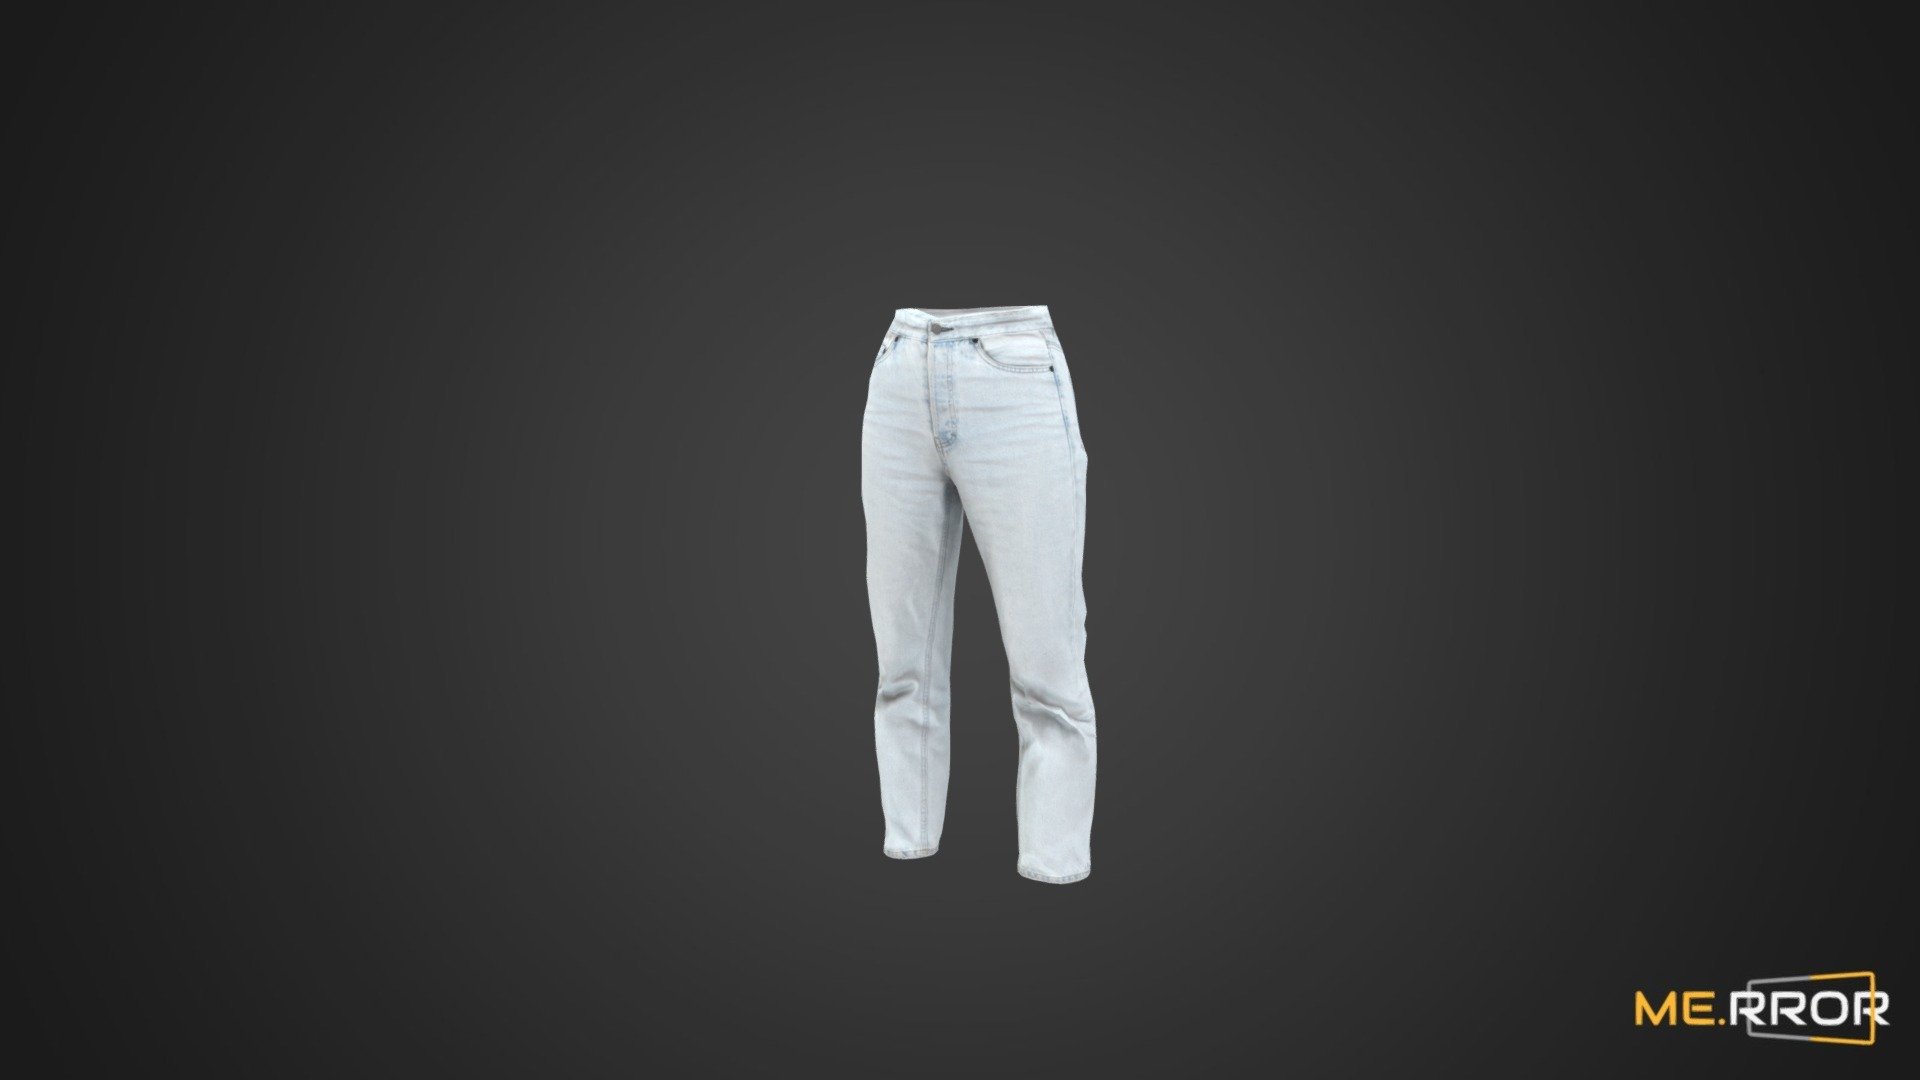 MERROR is a 3D Content PLATFORM which introduces various Asian assets to the 3D world


3DScanning #Photogrametry #ME.RROR - [Game-Ready] Skyblue Jean 2 - Buy Royalty Free 3D model by ME.RROR (@merror) 3d model